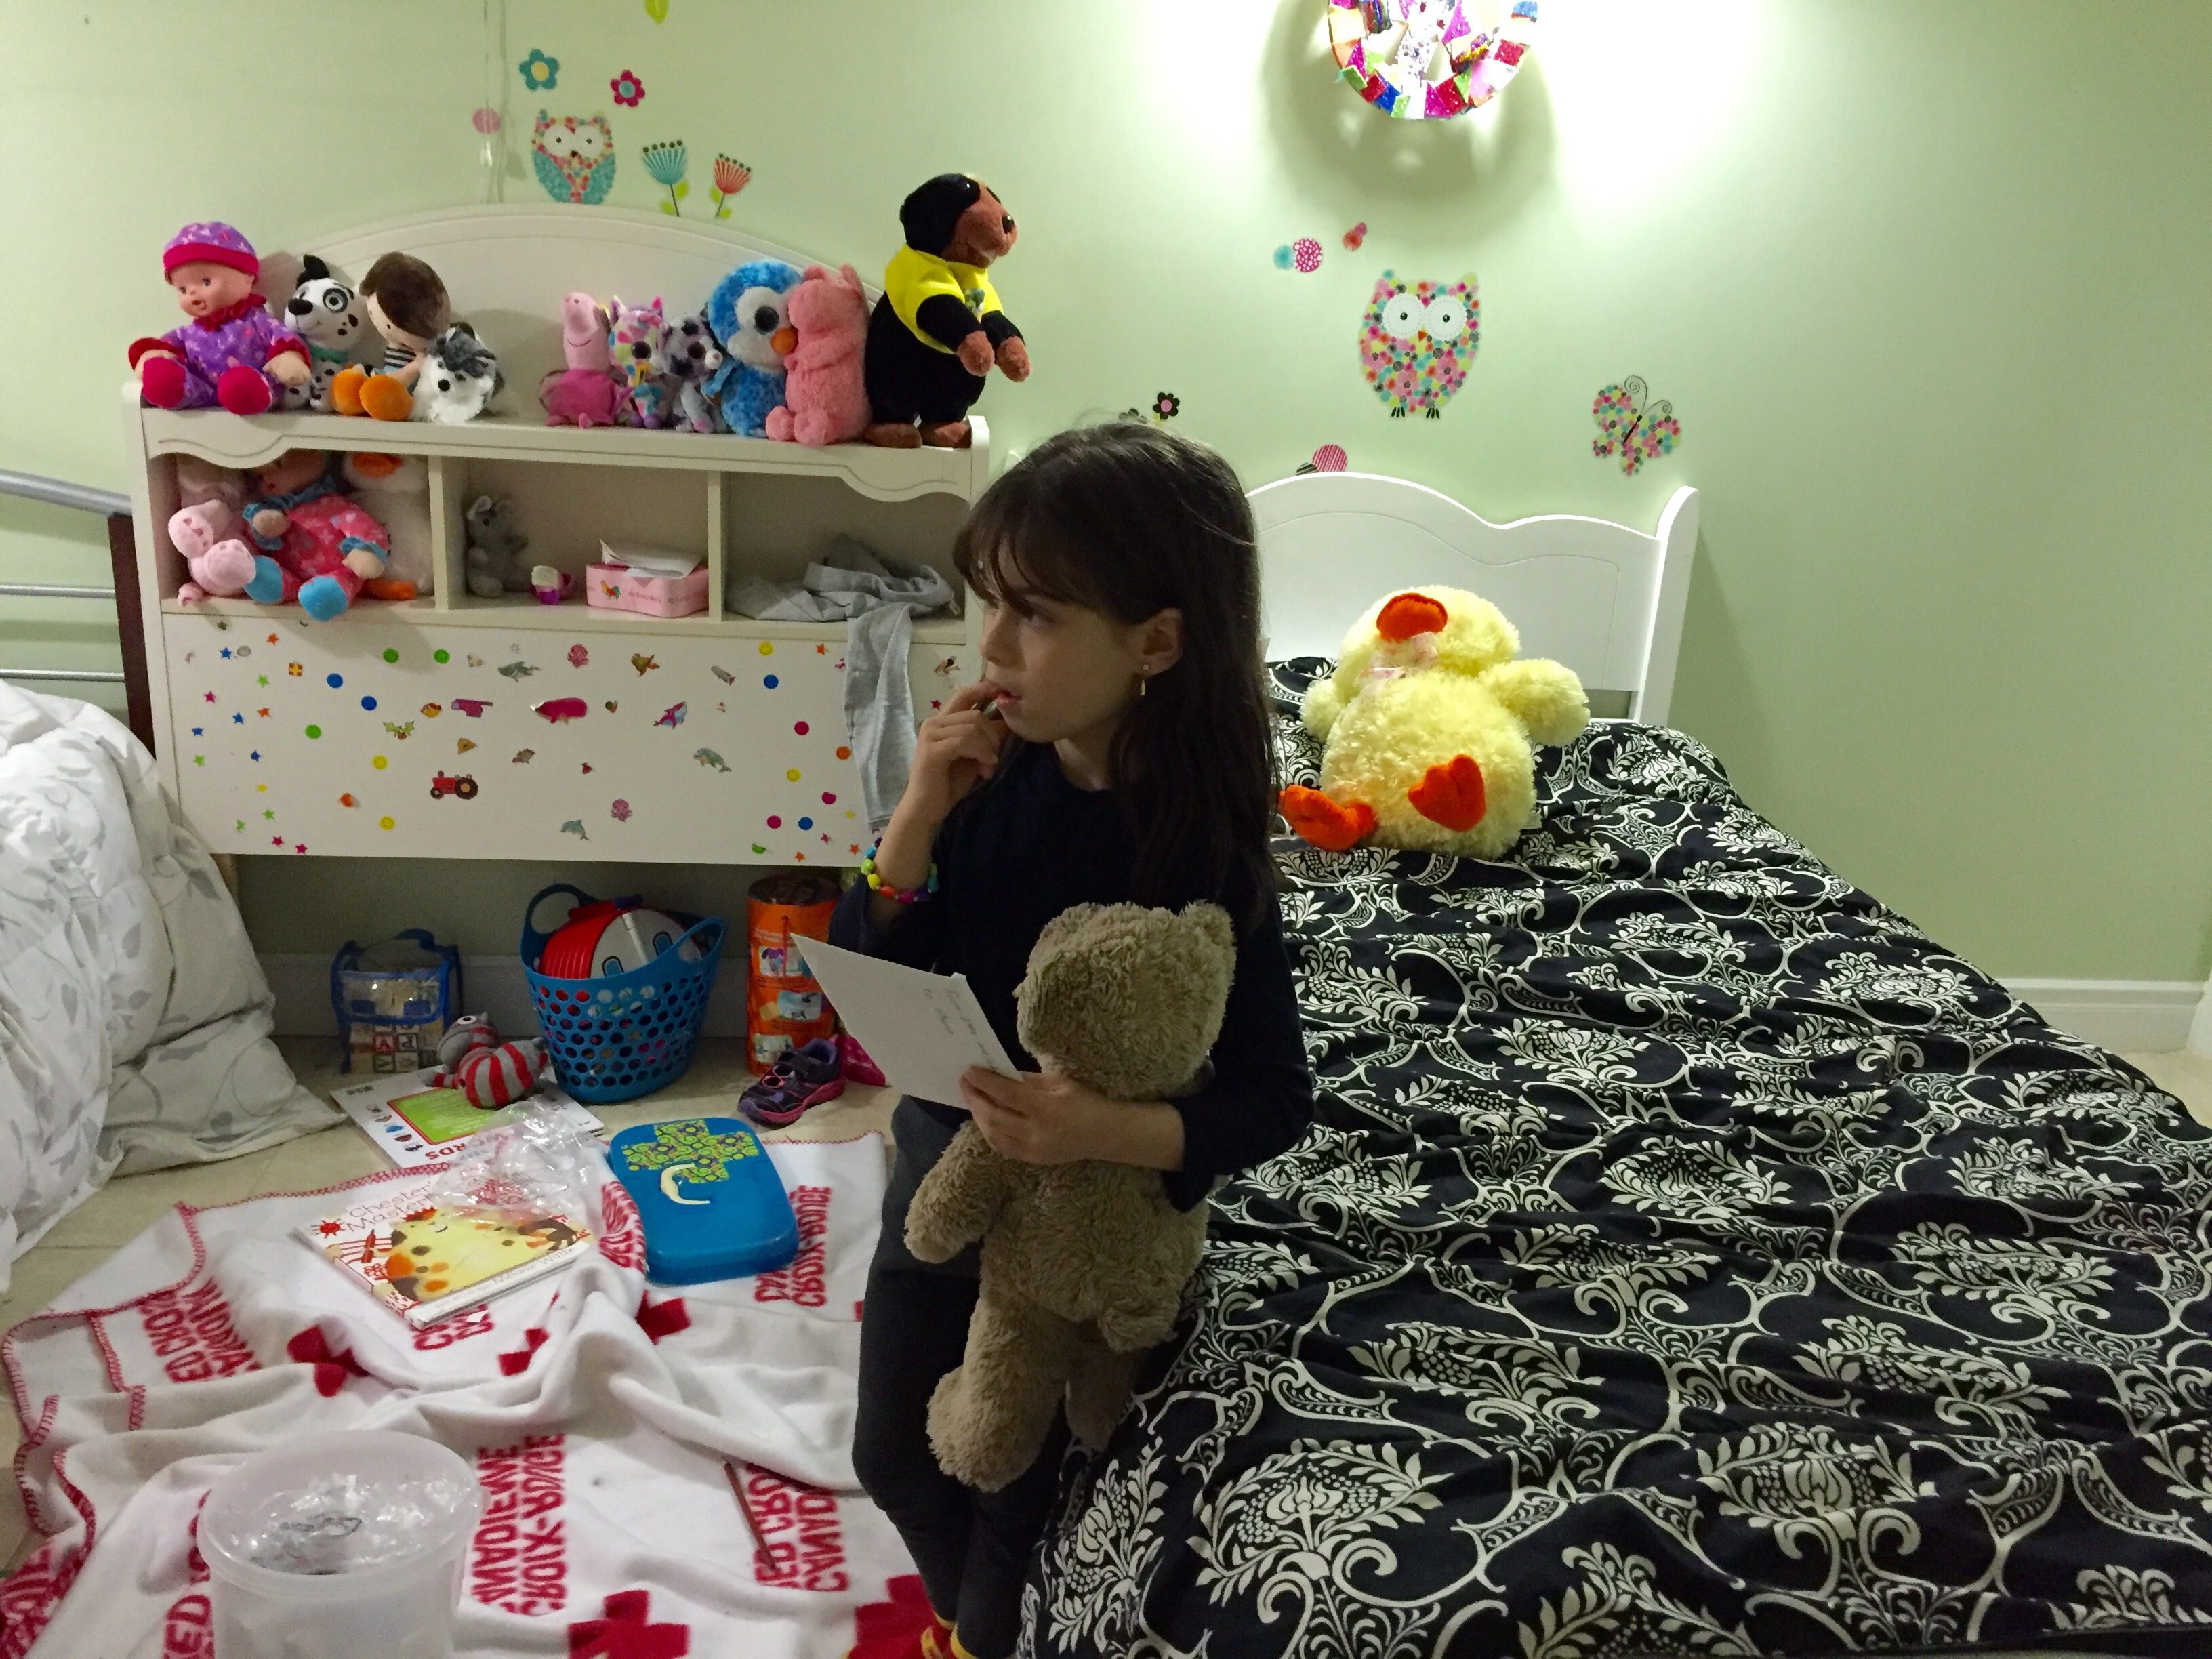 The girls' new room